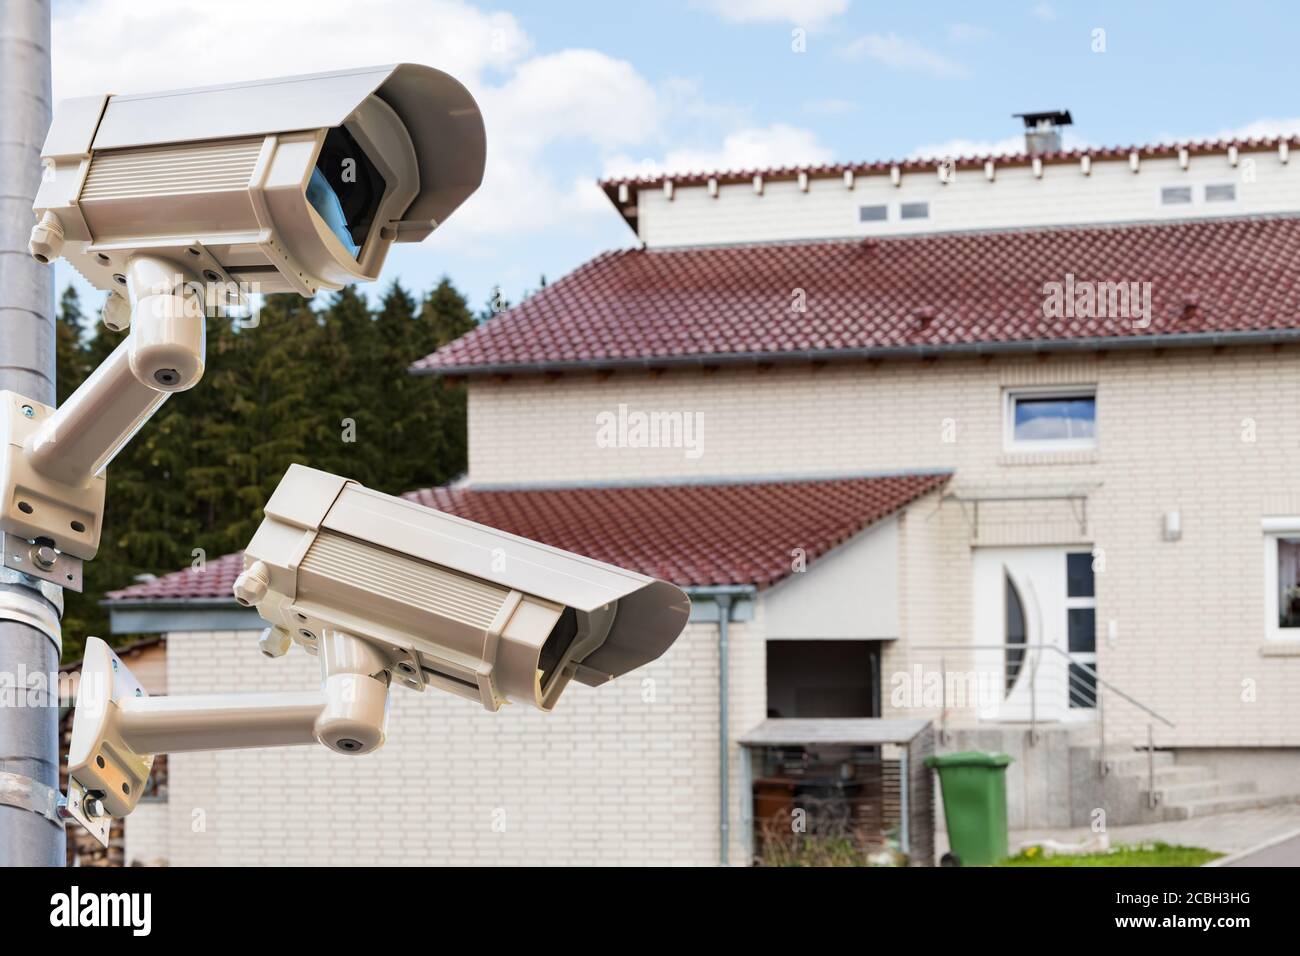 CCTV Security Video Cameras Watching Private House Stock Photo